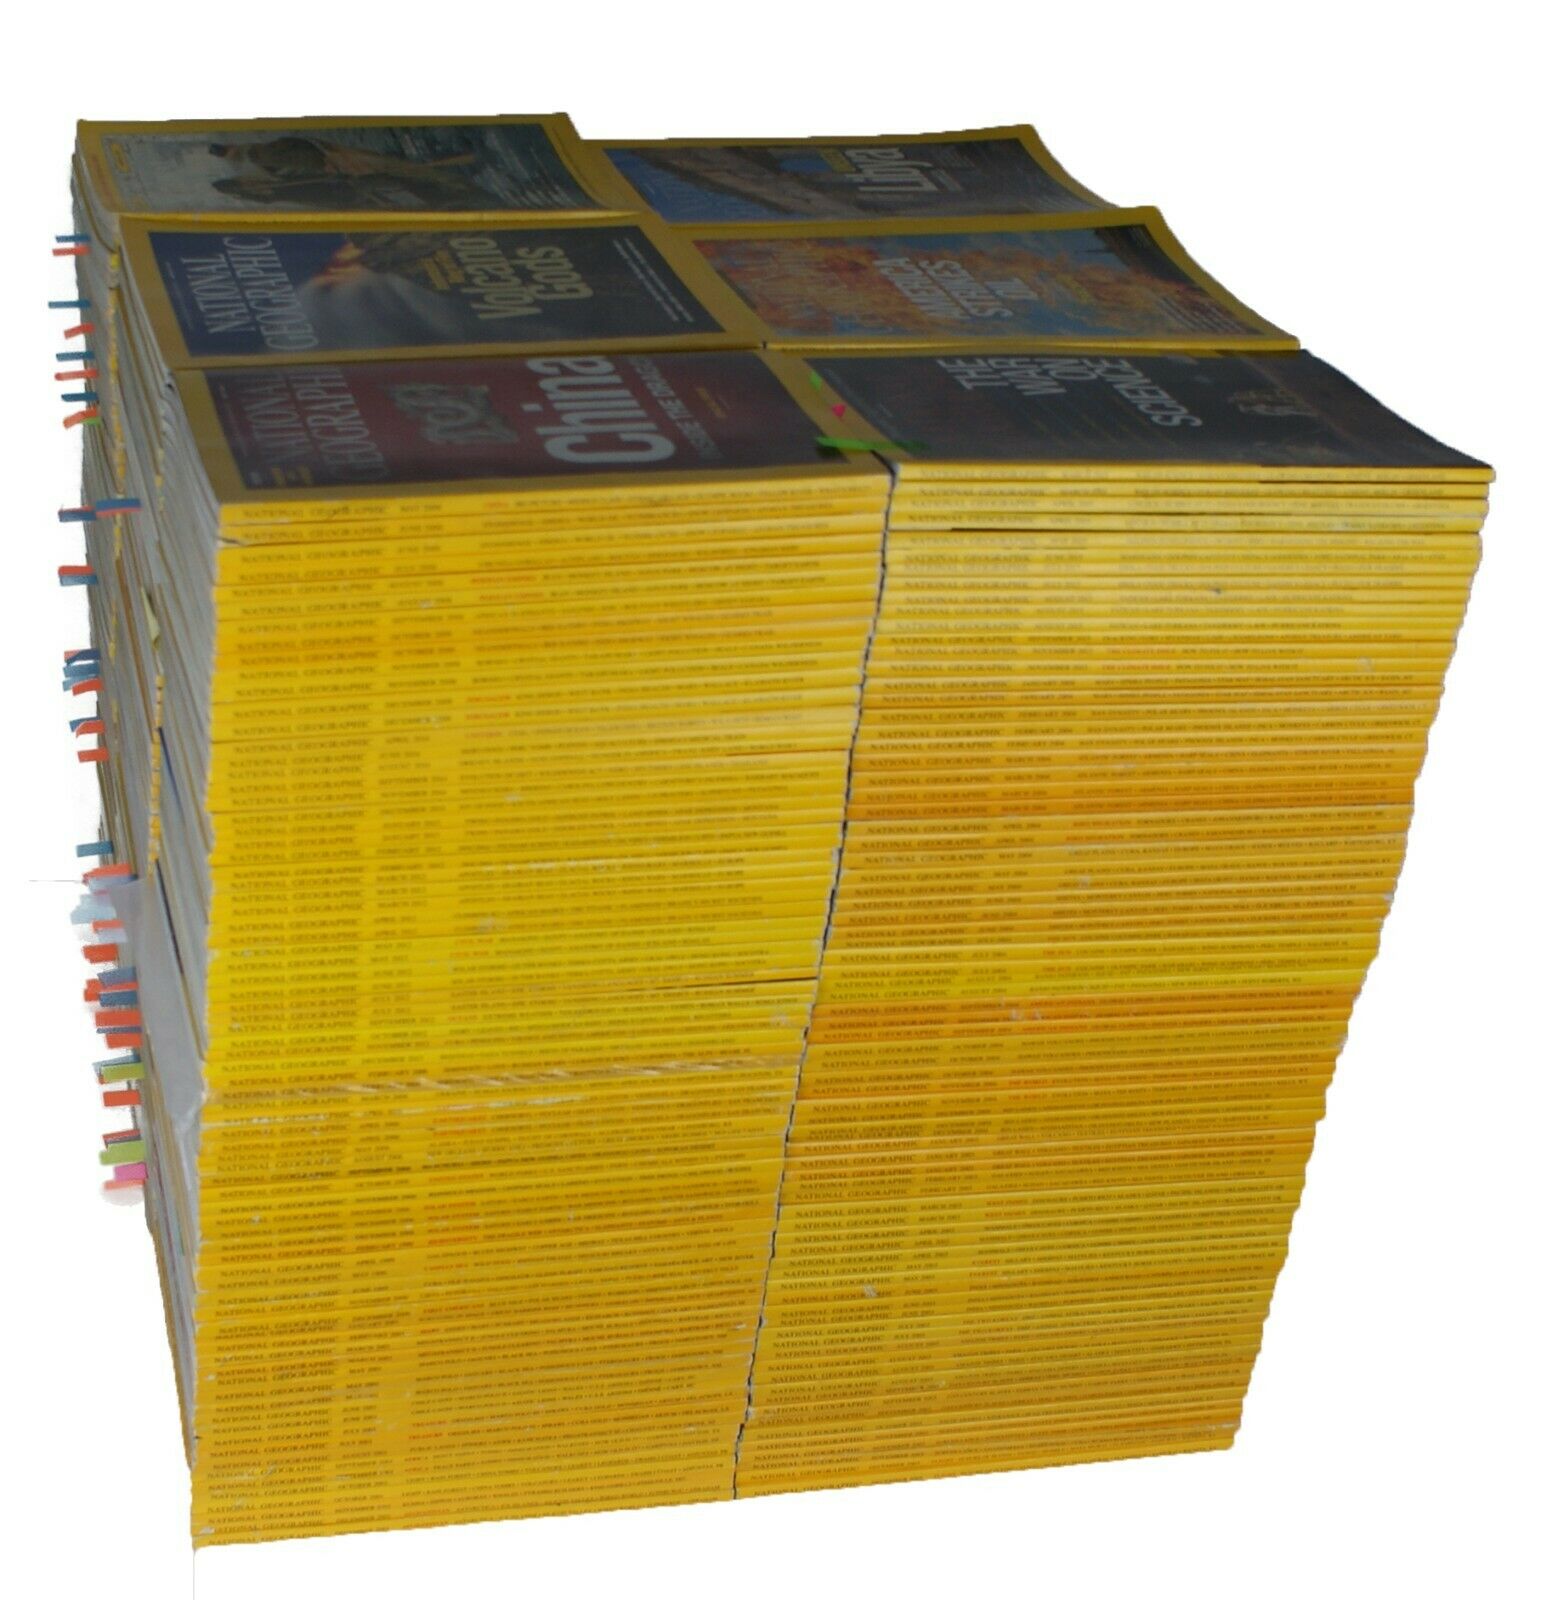 National Geographic Magazines. Build Your Own Lot. 2000s With Pictures